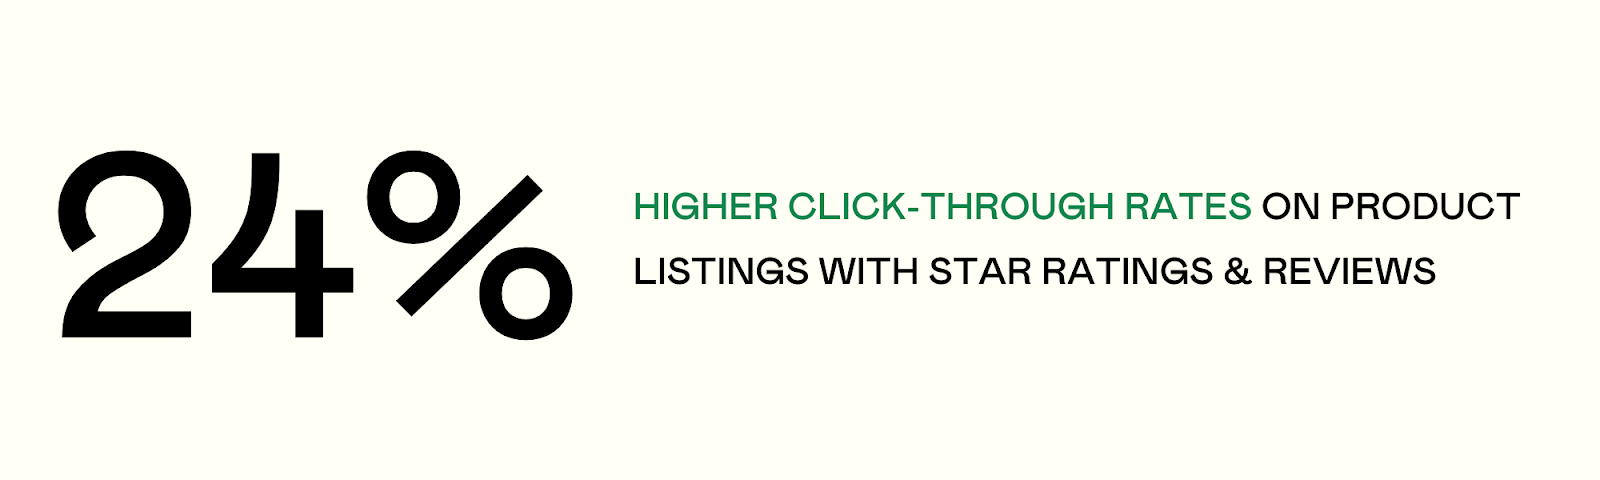 Product Listings on Google Shopping that have star ratings and reviews have 24% higher click through rates